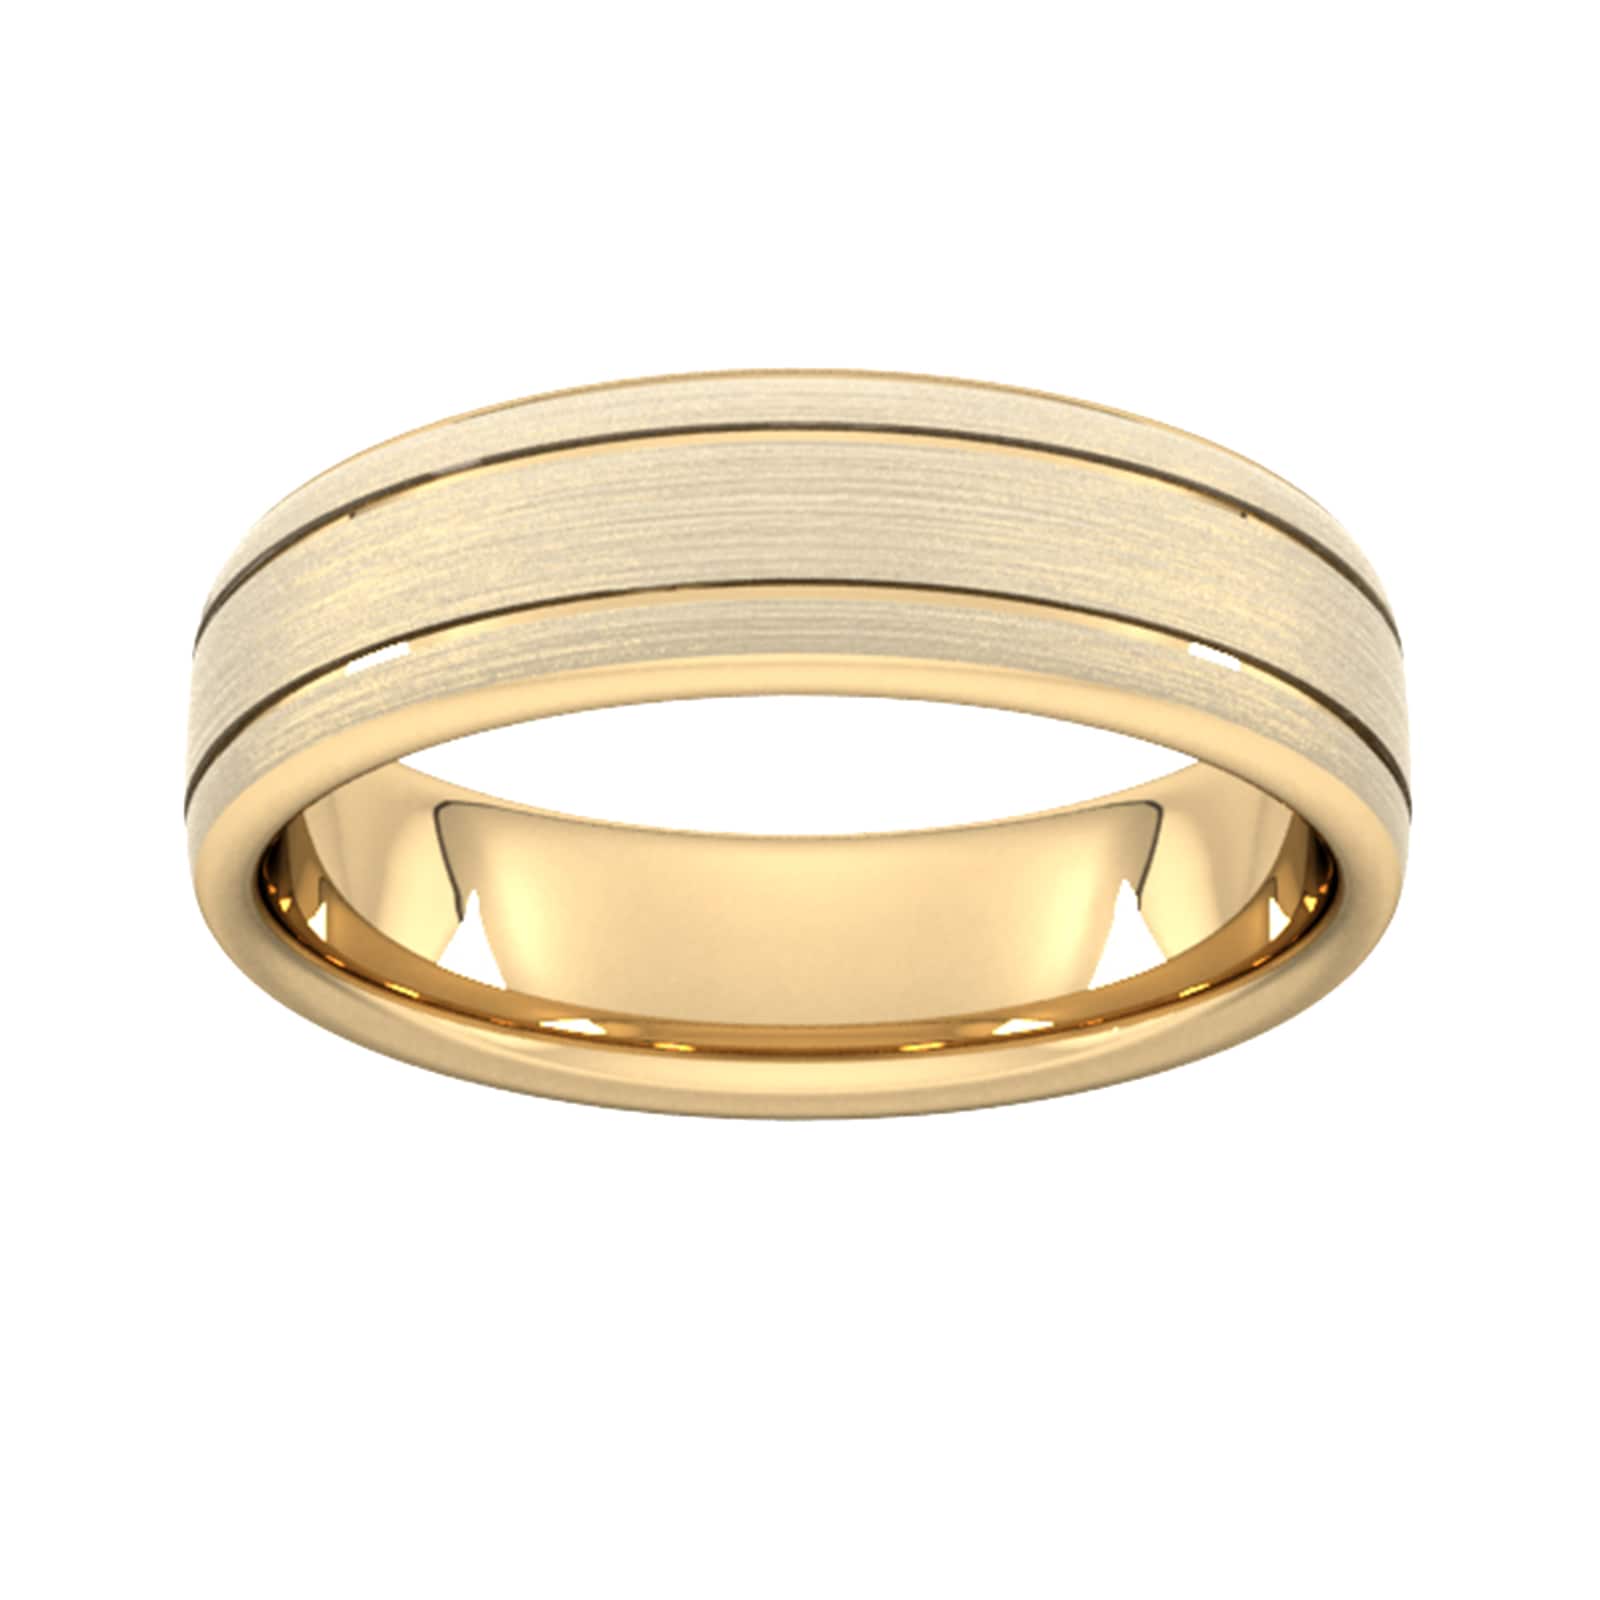 6mm D Shape Standard Matt Finish With Double Grooves Wedding Ring In 9 Carat Yellow Gold - Ring Size Y